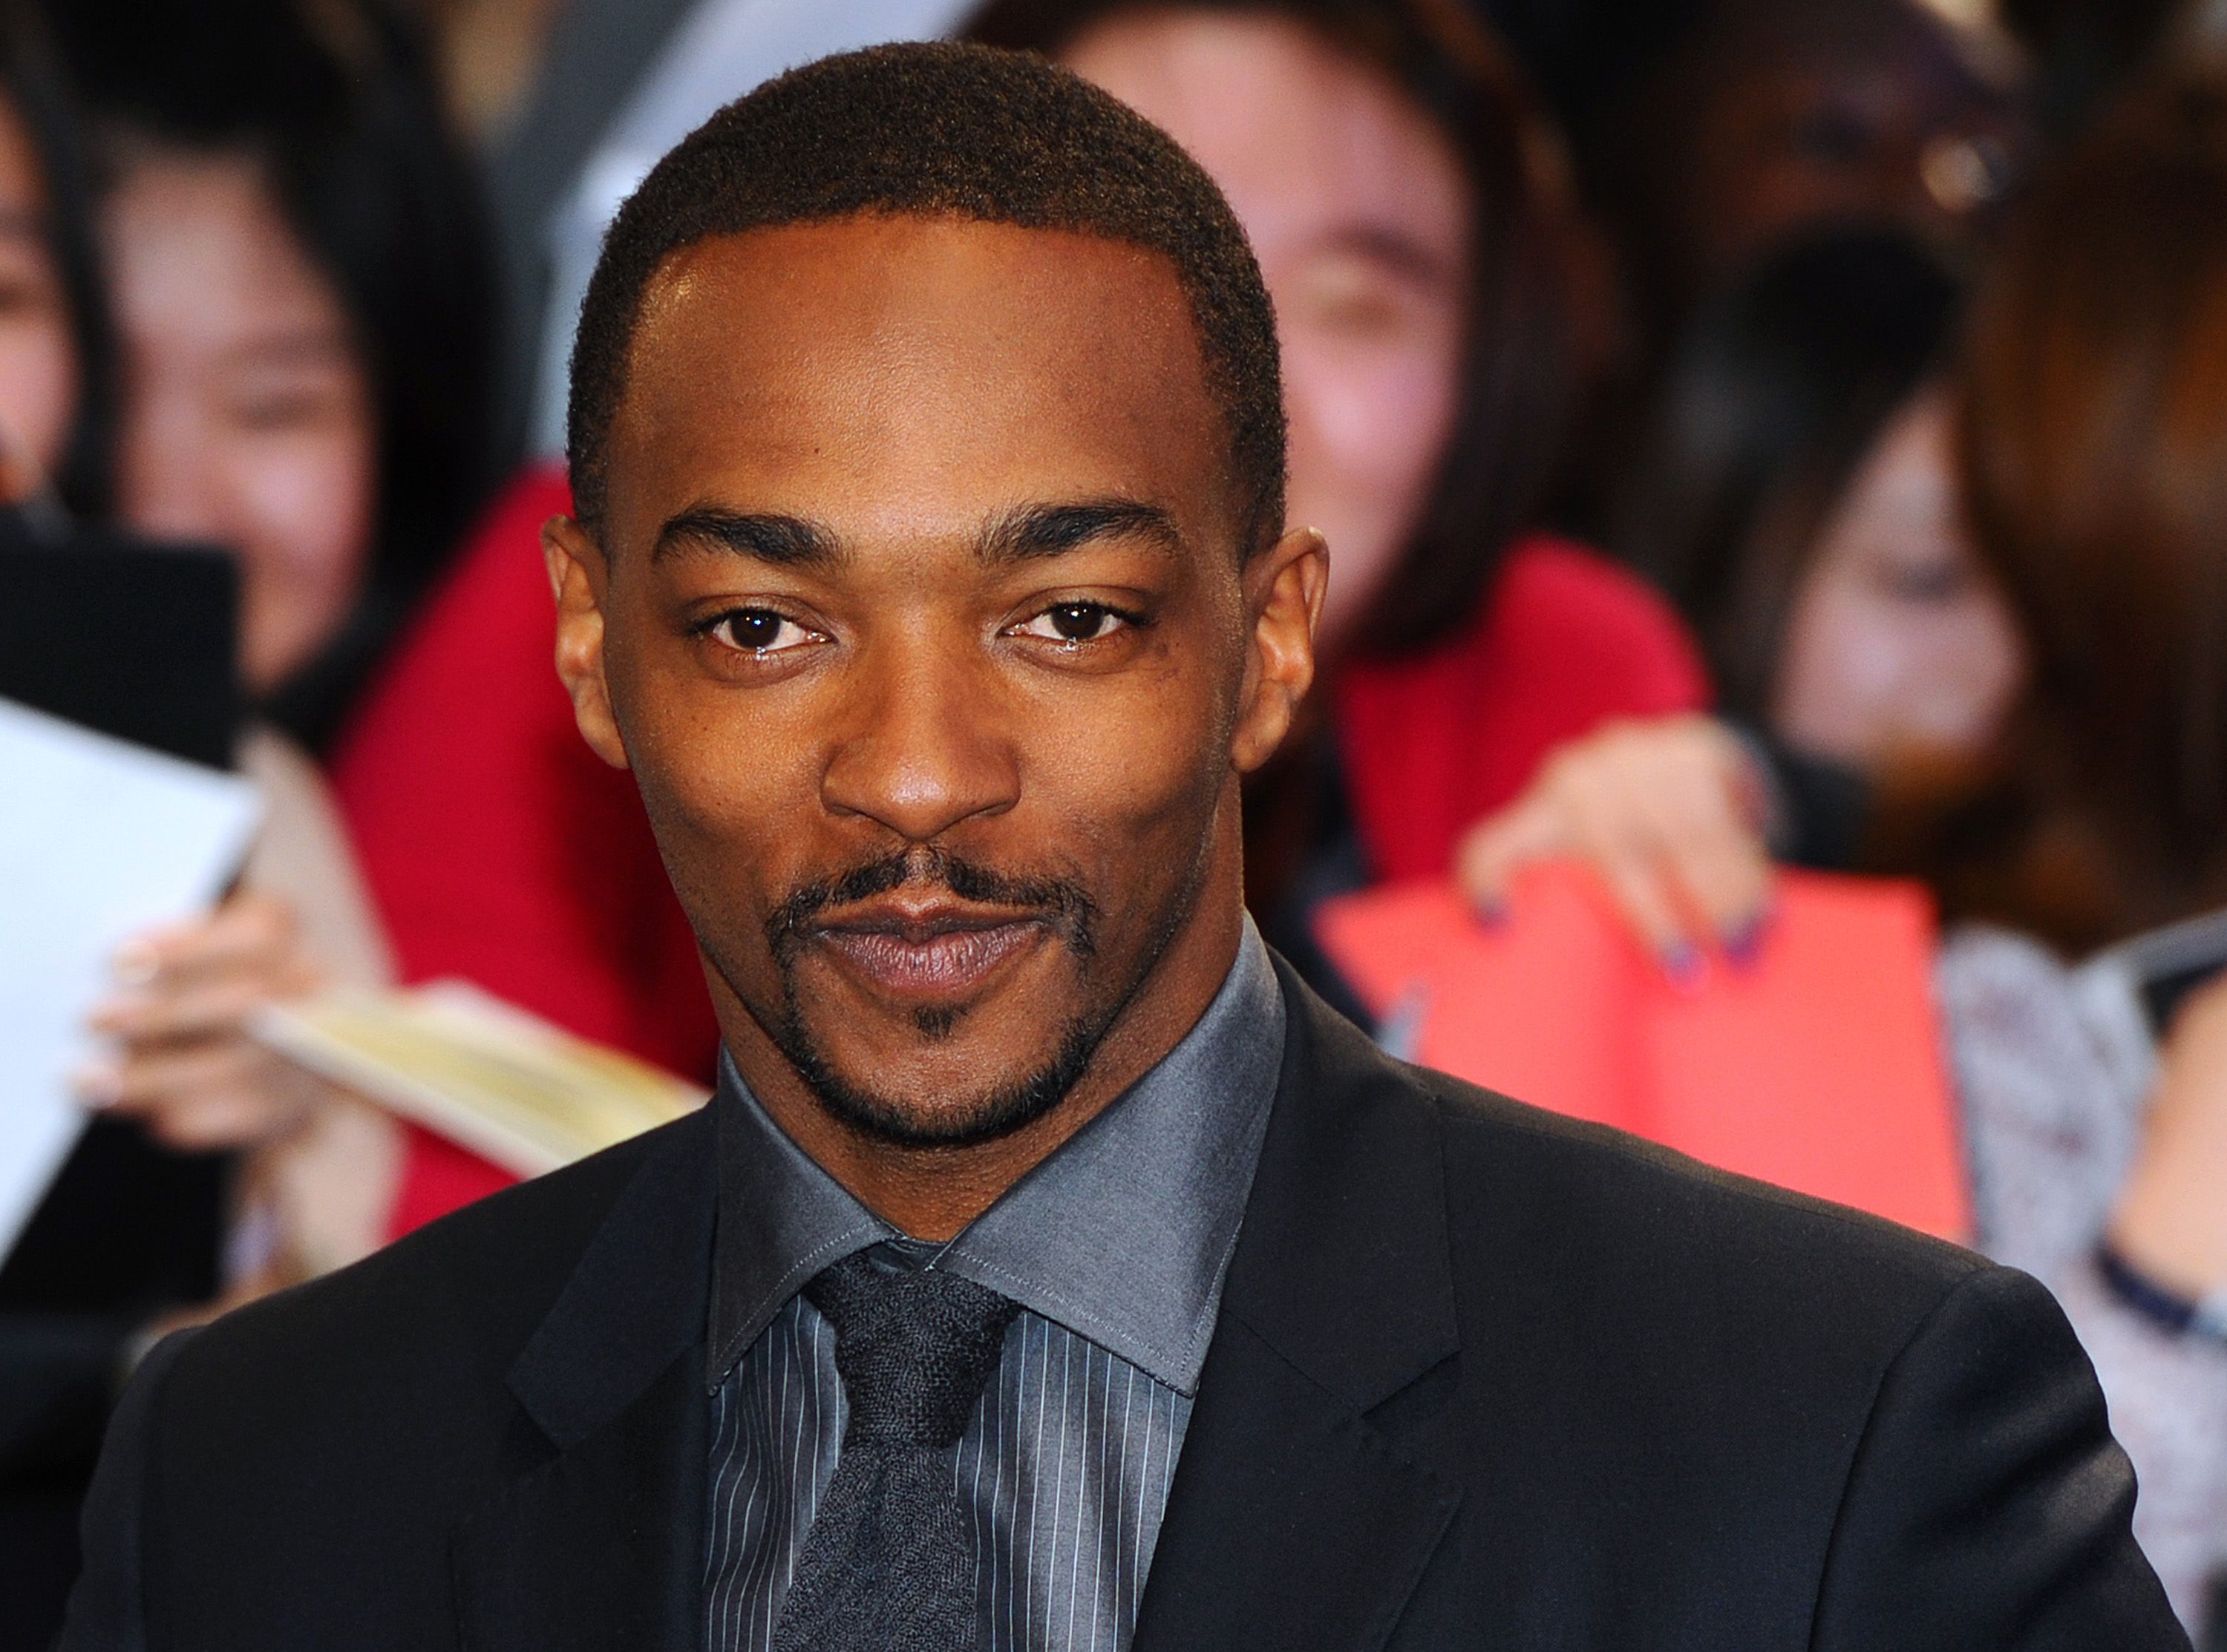 Anthony Mackie during the UK Film Premiere of "Captain America: The Winter Soldier" at Westfield London on March 20, 2014, in London, England. | Source: Getty Images